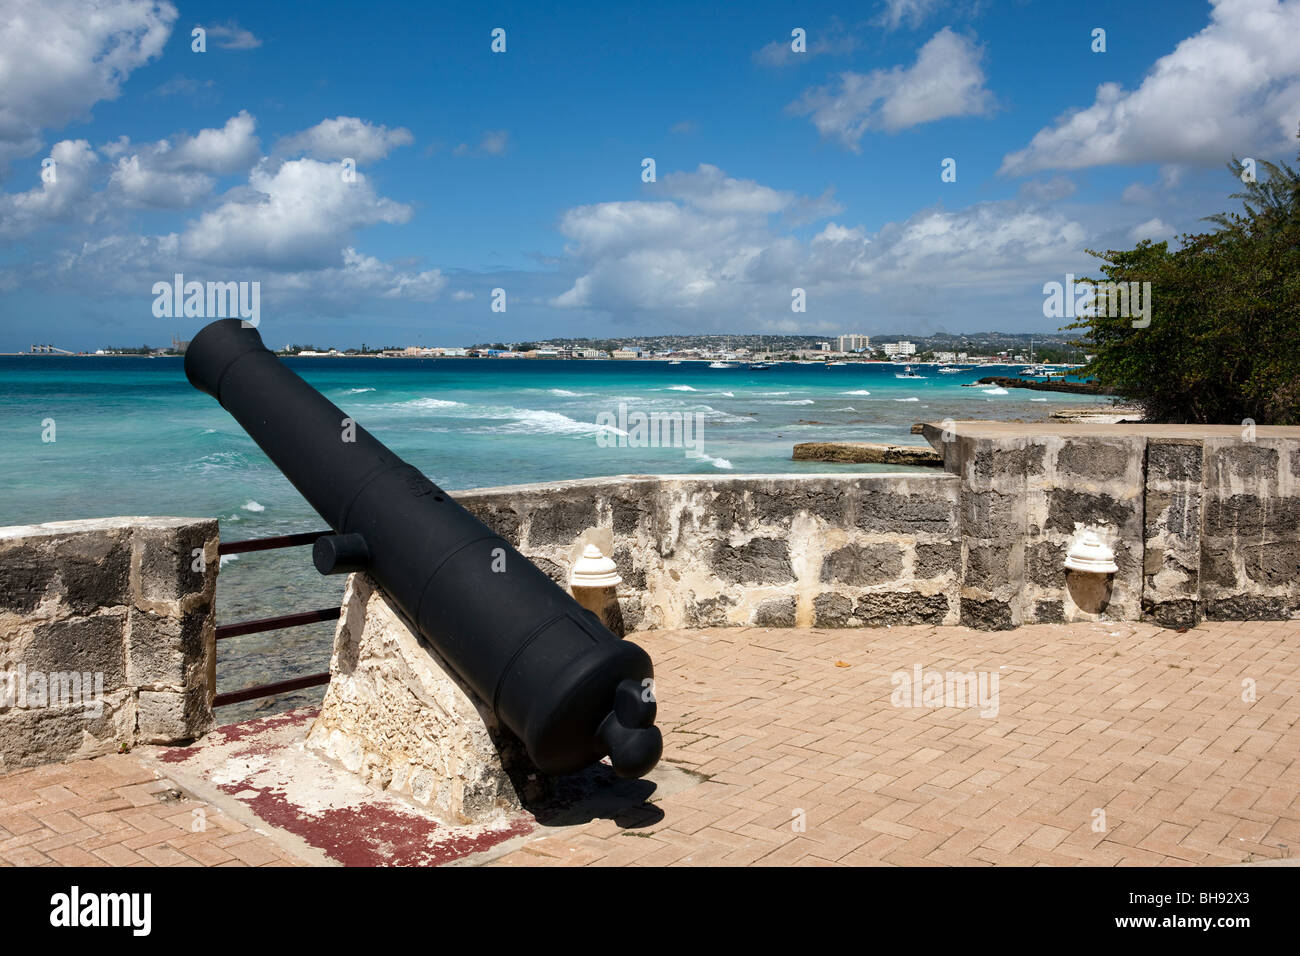 Ancient cannons facing the sea at Fort George, part of the Hilton Hotel, on the Caribbean island of Barbados Stock Photo